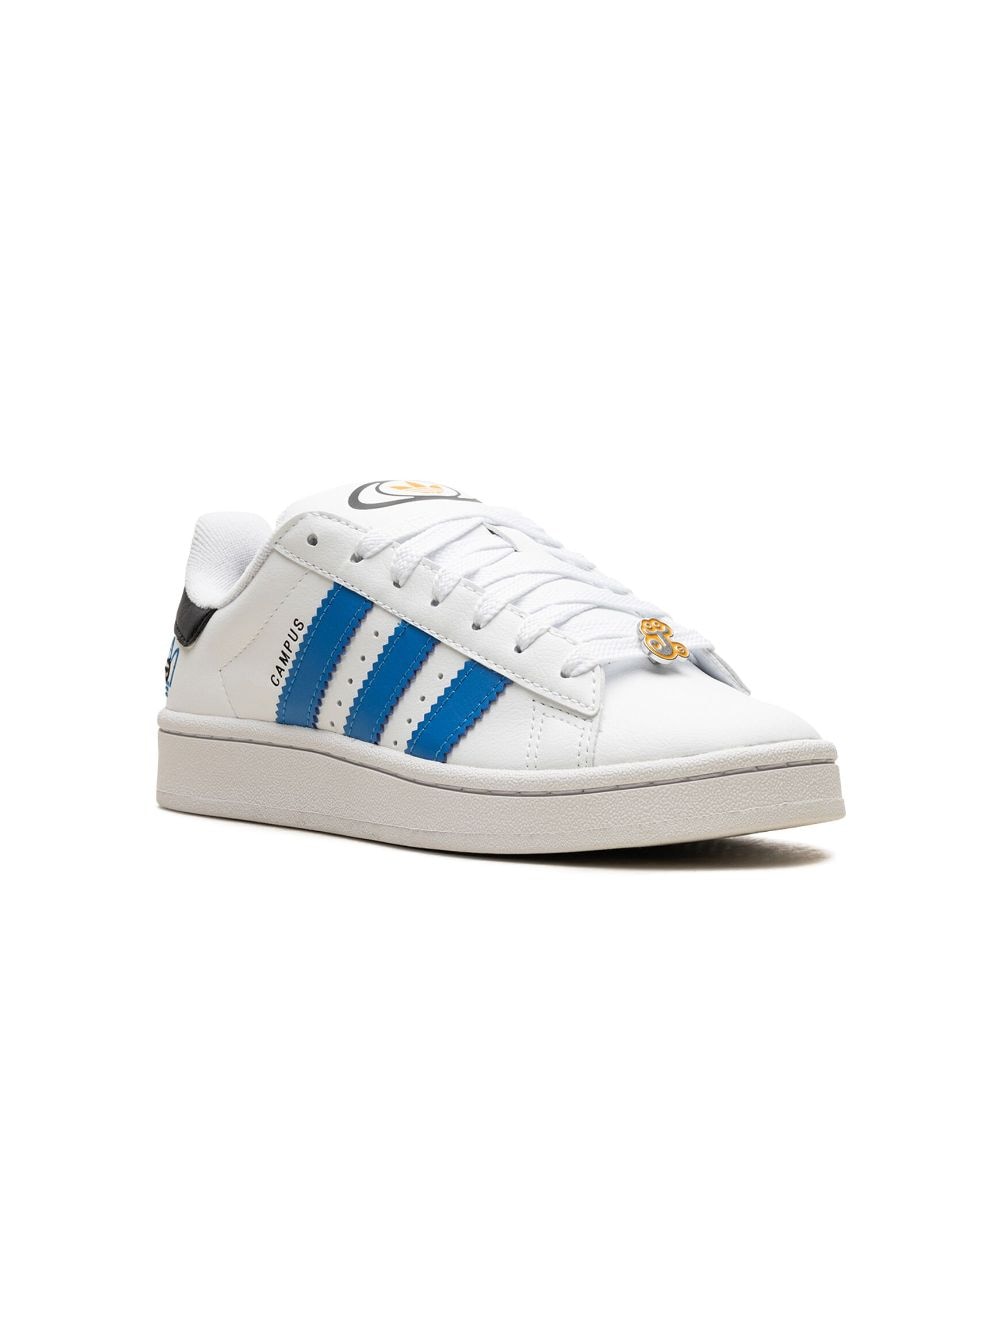 Image 1 of adidas Kids x James Jarvis Campus 00s J "Abstract Trefoil" sneakers